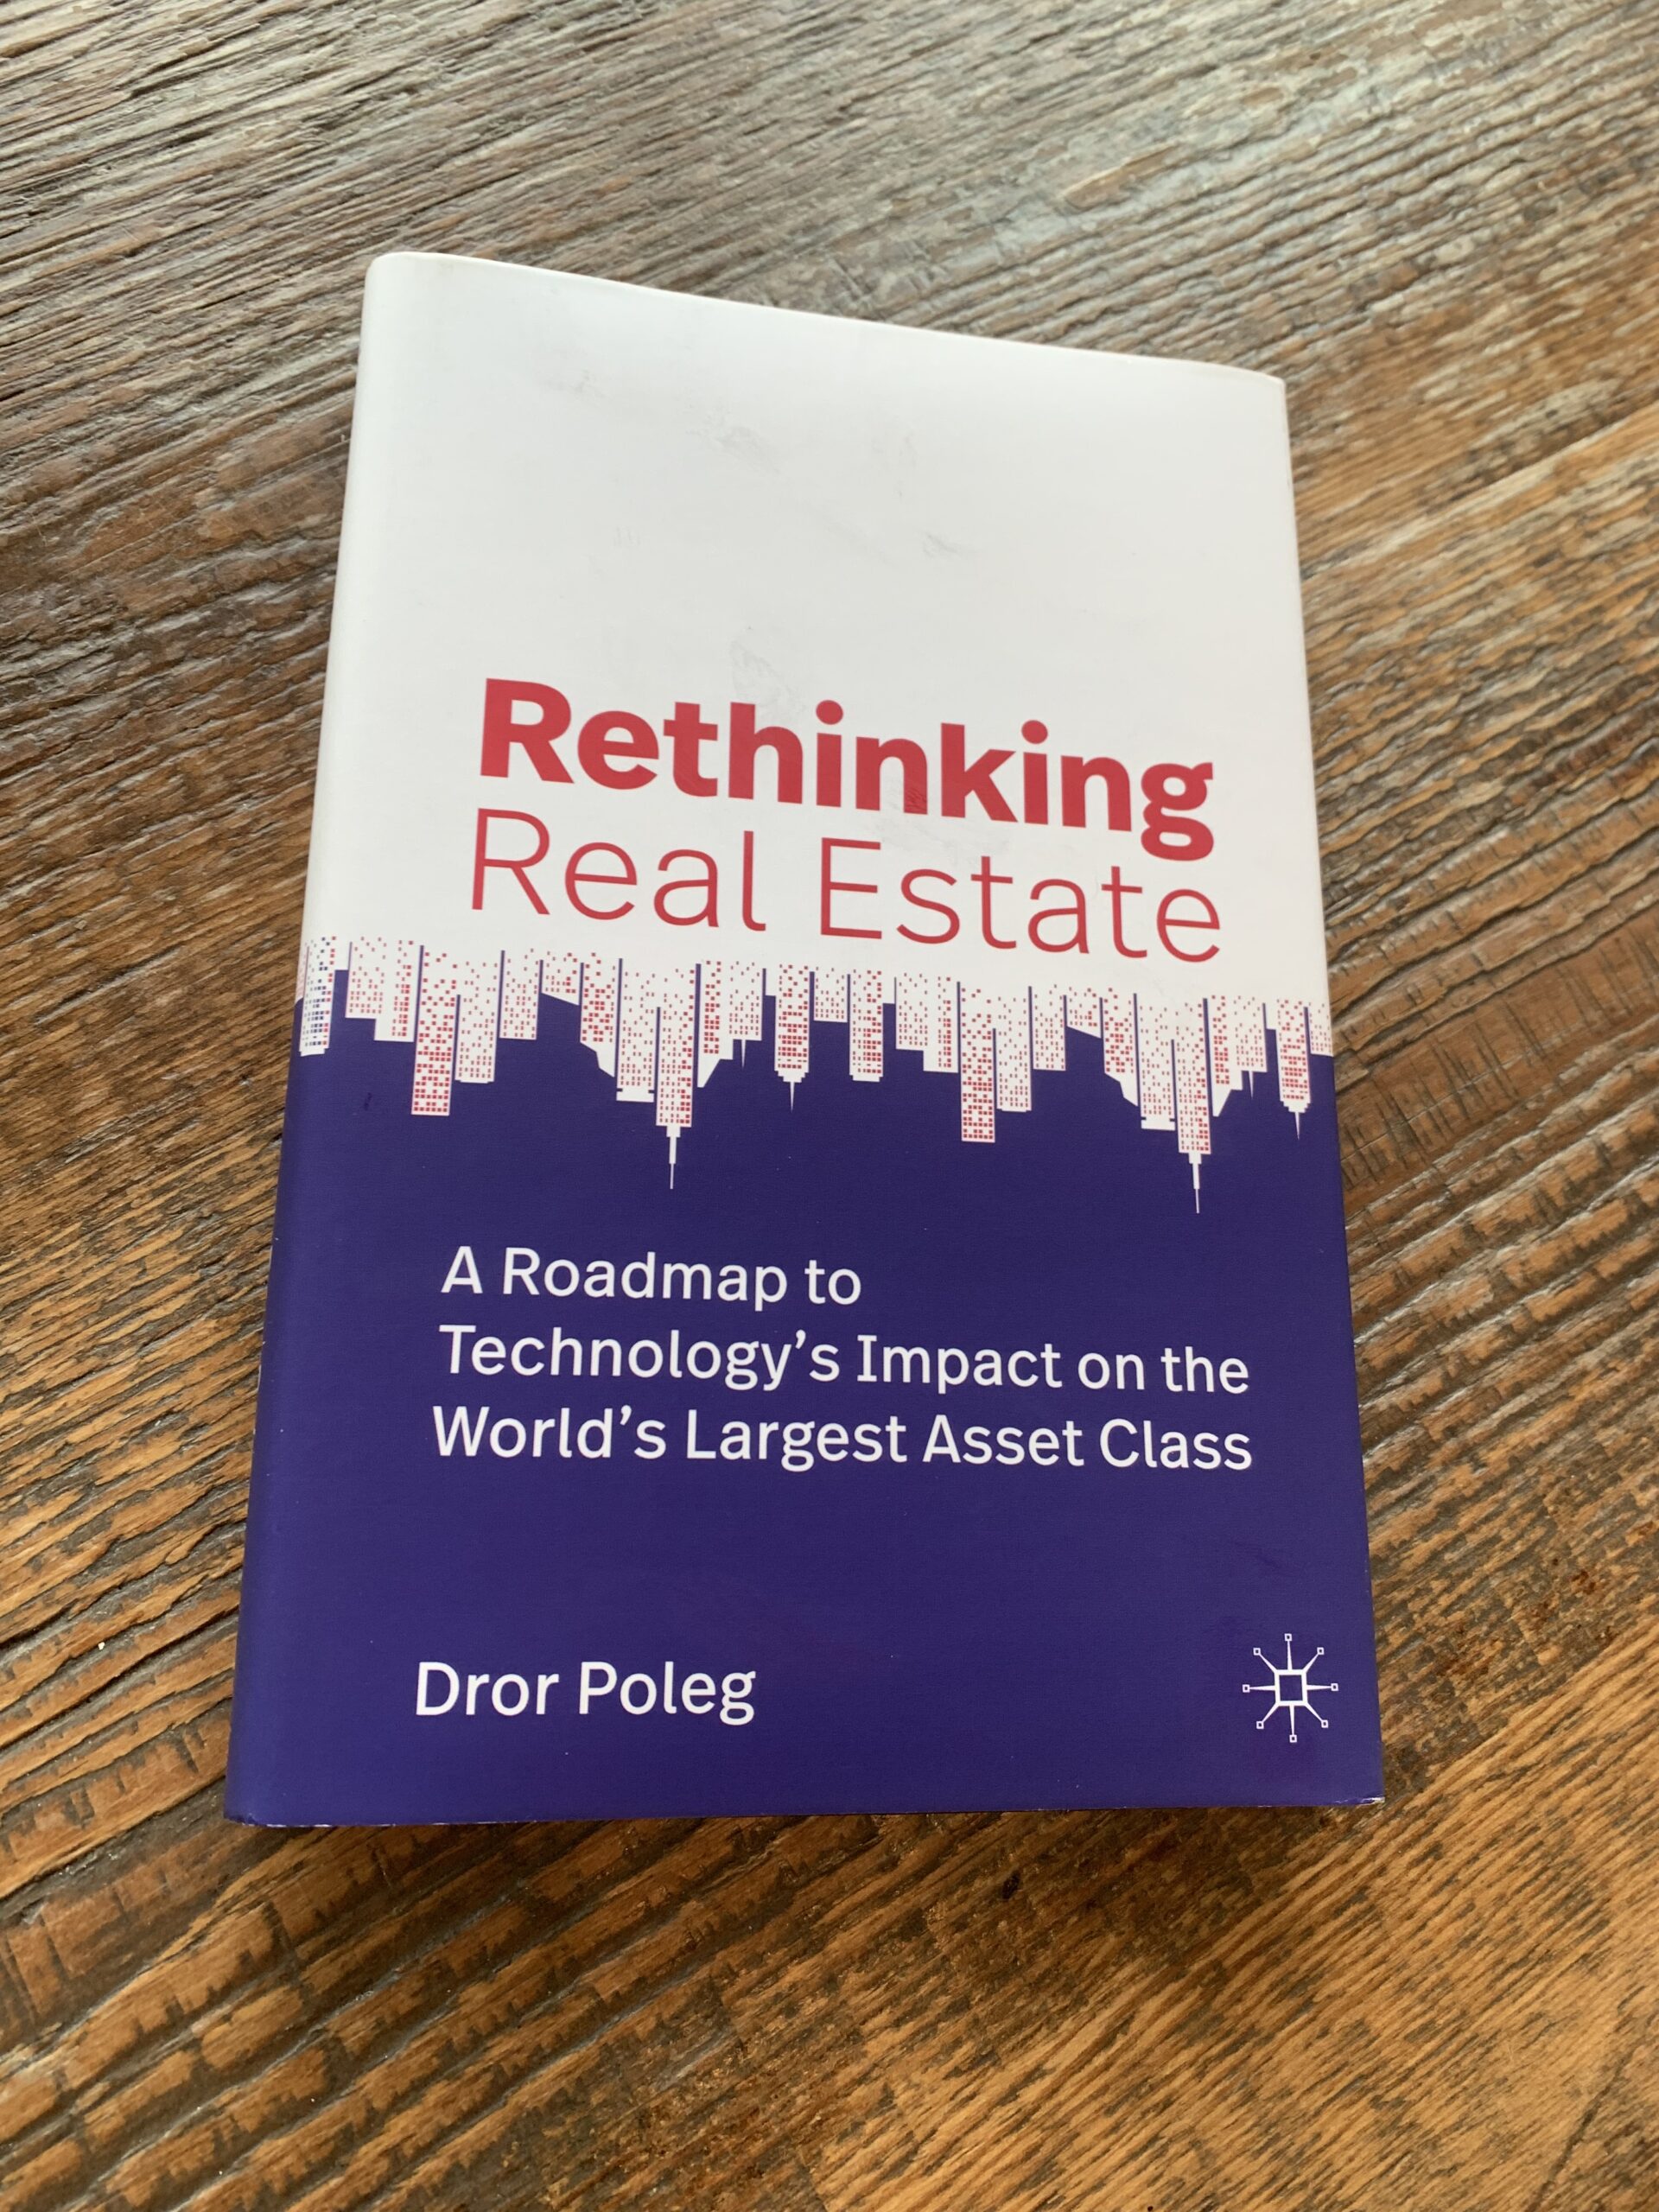 Rethinking Real Estate A Roadmap to Technology's Impact on the World's Largest Asset Class by Dror Poleg